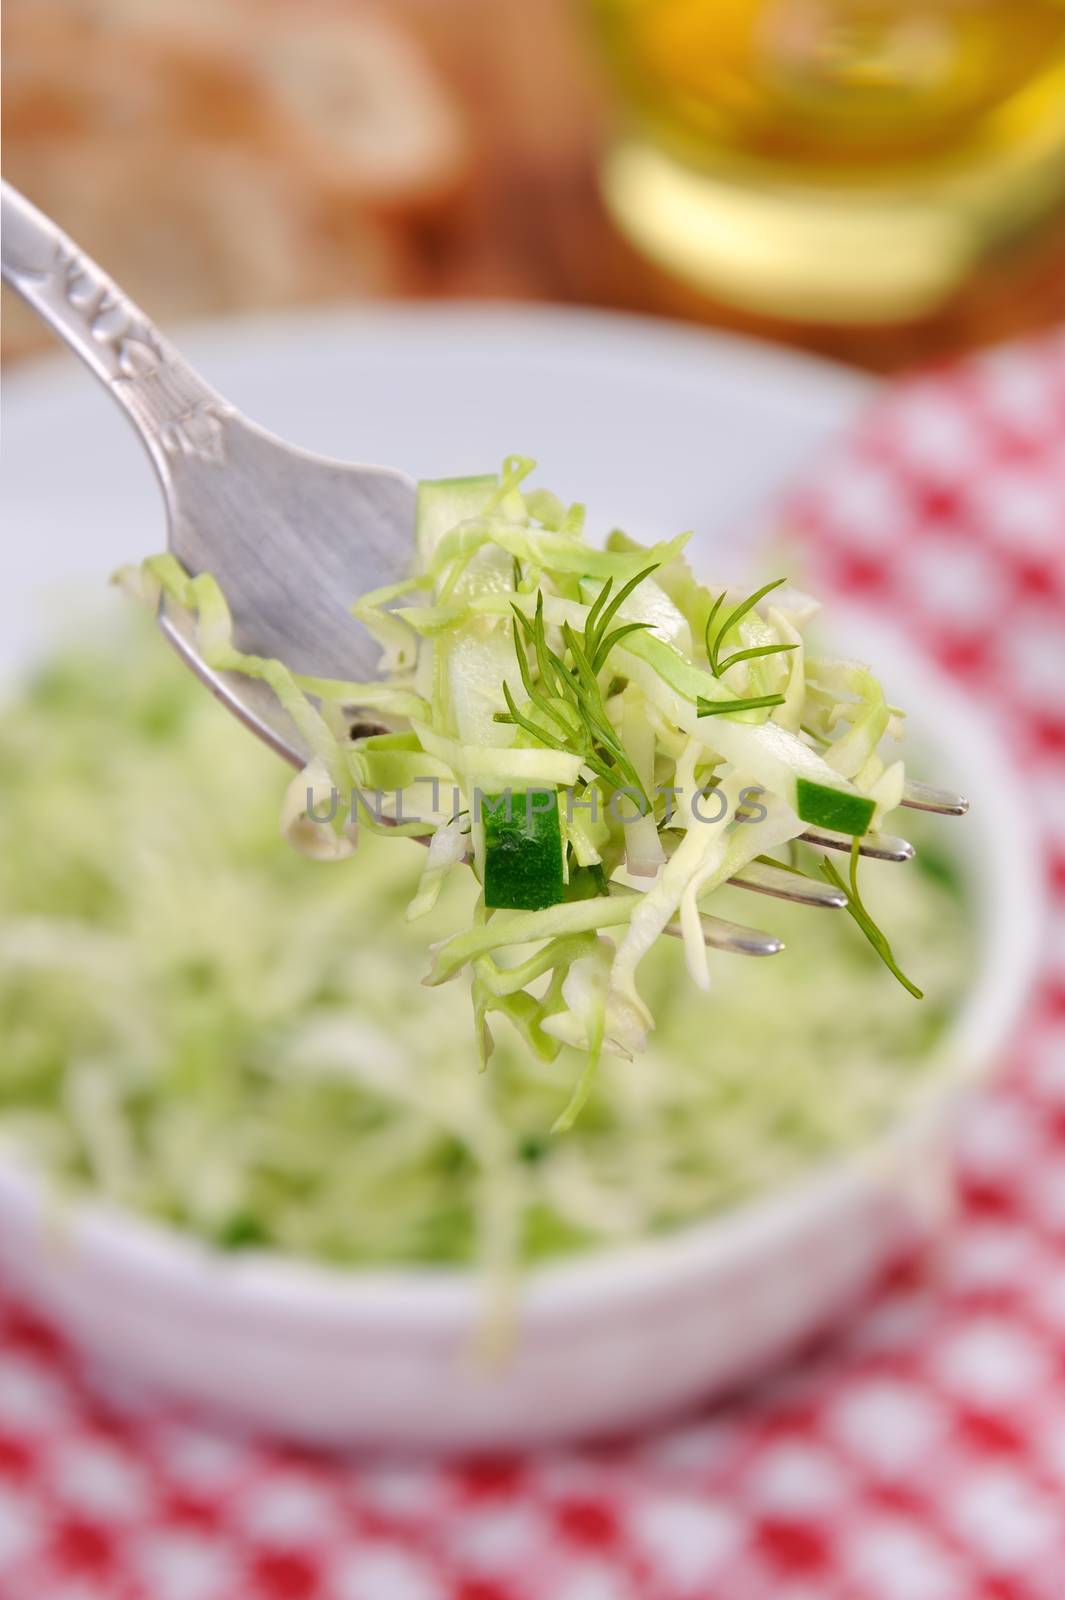 Salad with cucumber coleslaw on a fork close up